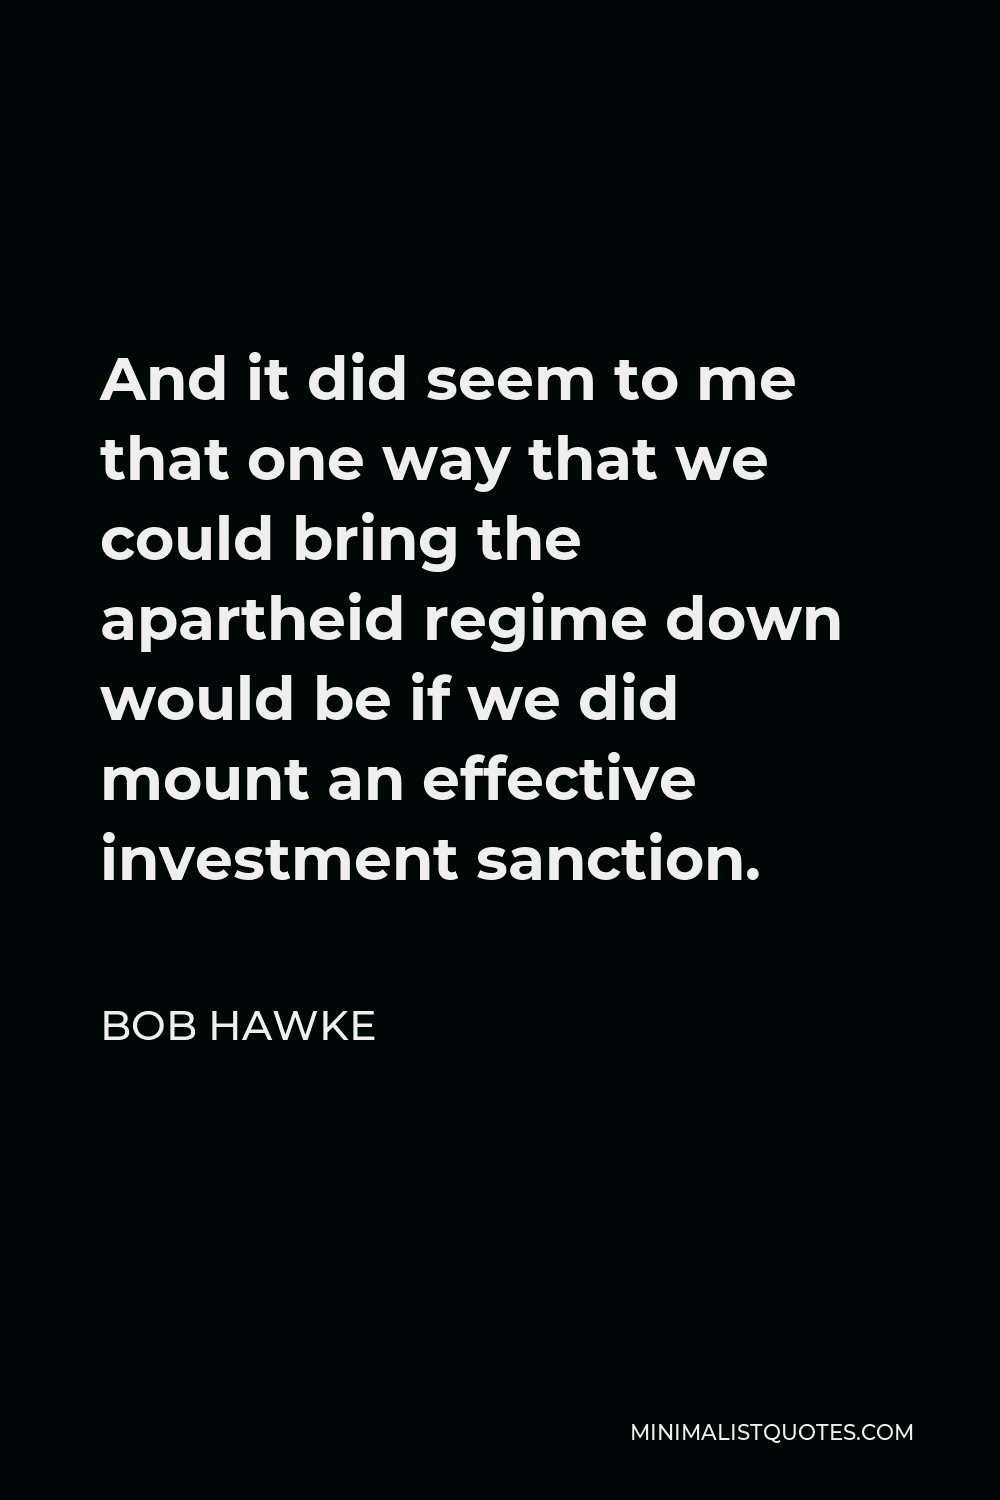 Bob Hawke Quote - And it did seem to me that one way that we could bring the apartheid regime down would be if we did mount an effective investment sanction.